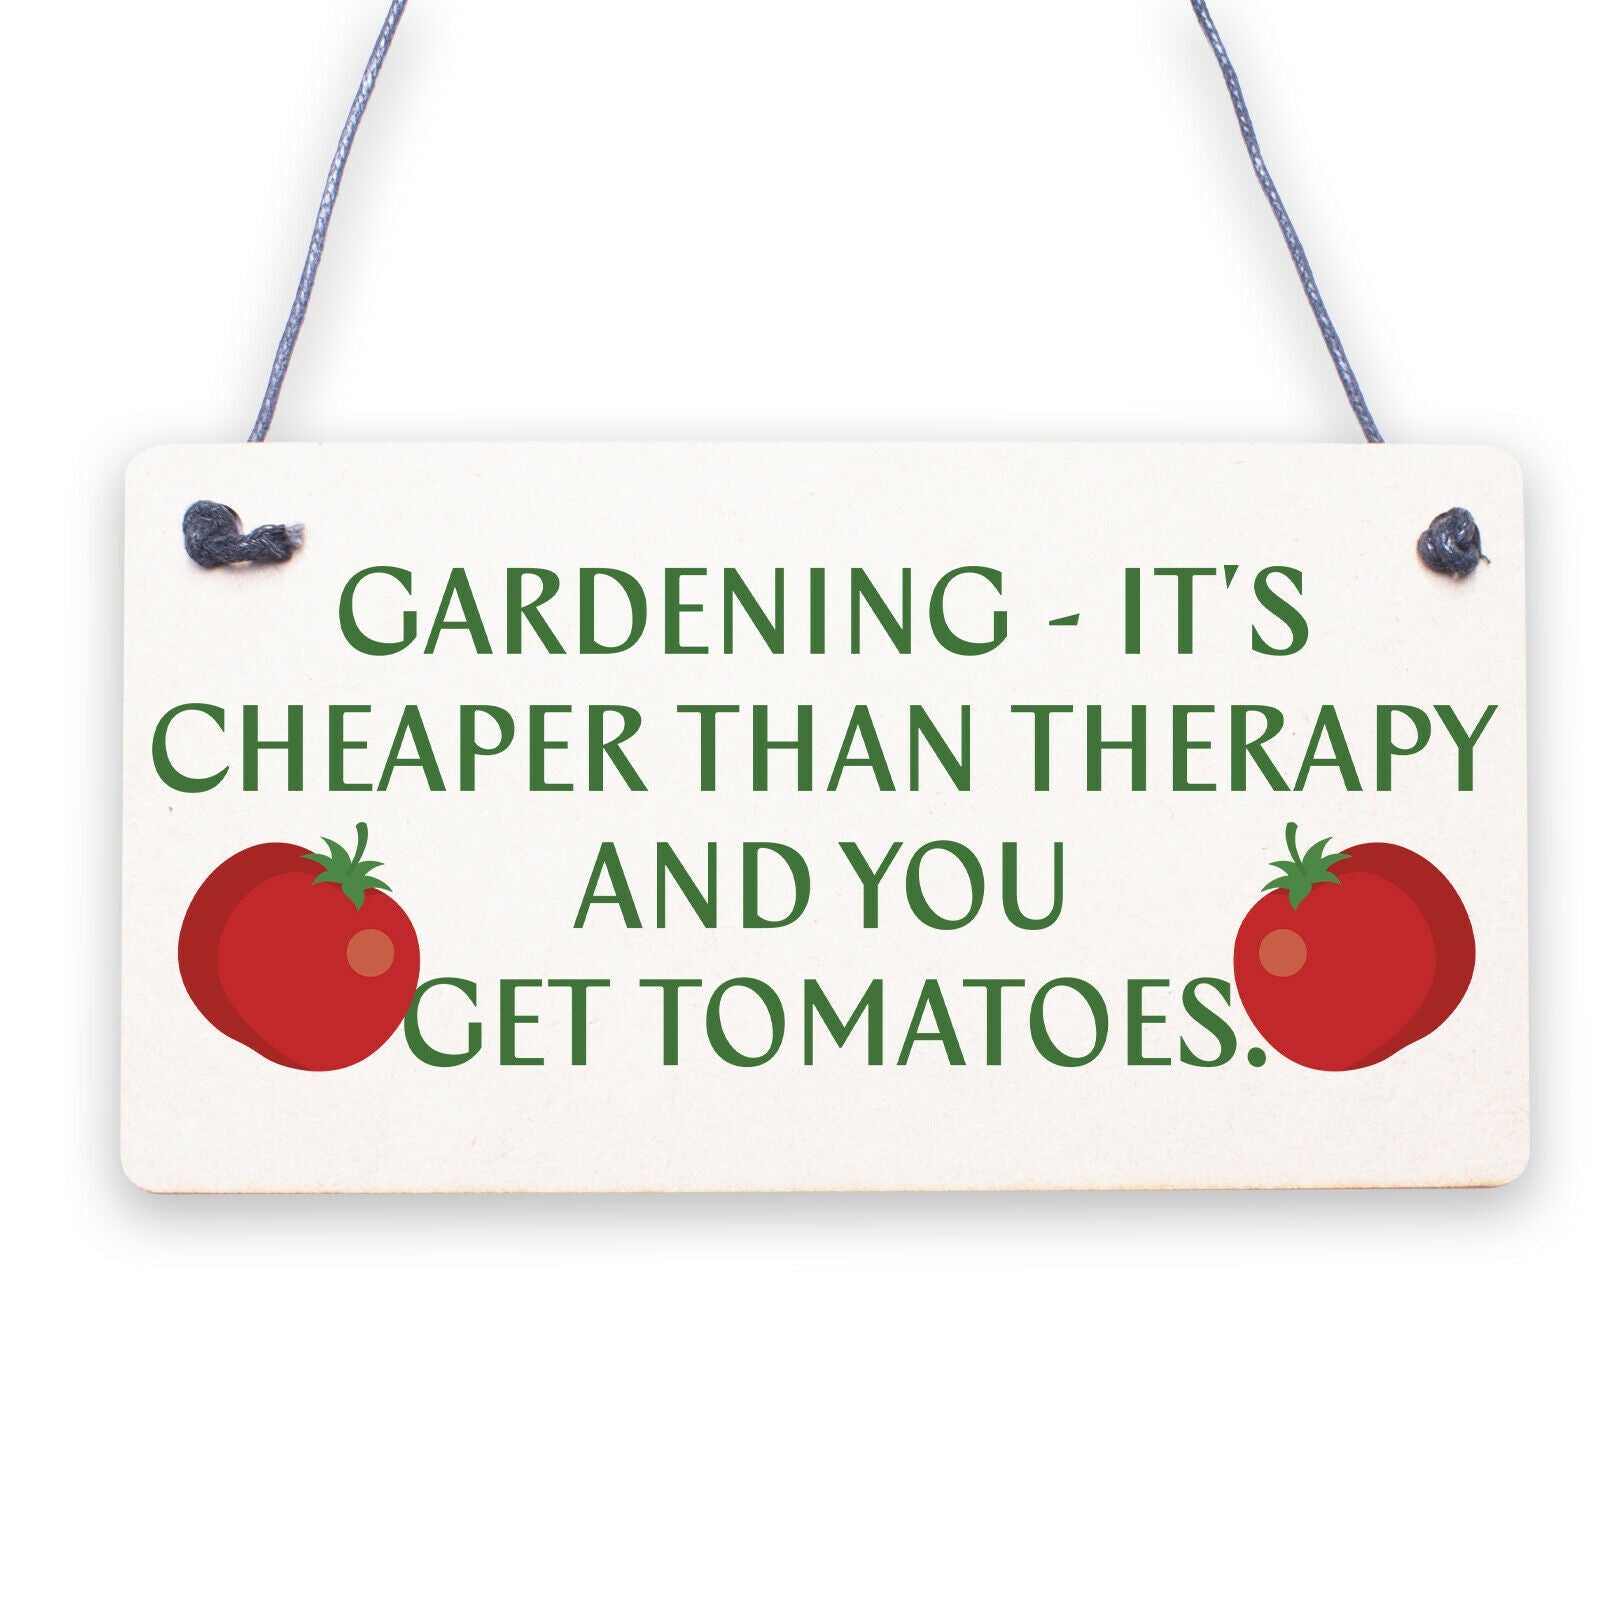 Gardening It's Cheaper Than Therapy Novelty Wooden Plaque Funny Garden Sign Gift